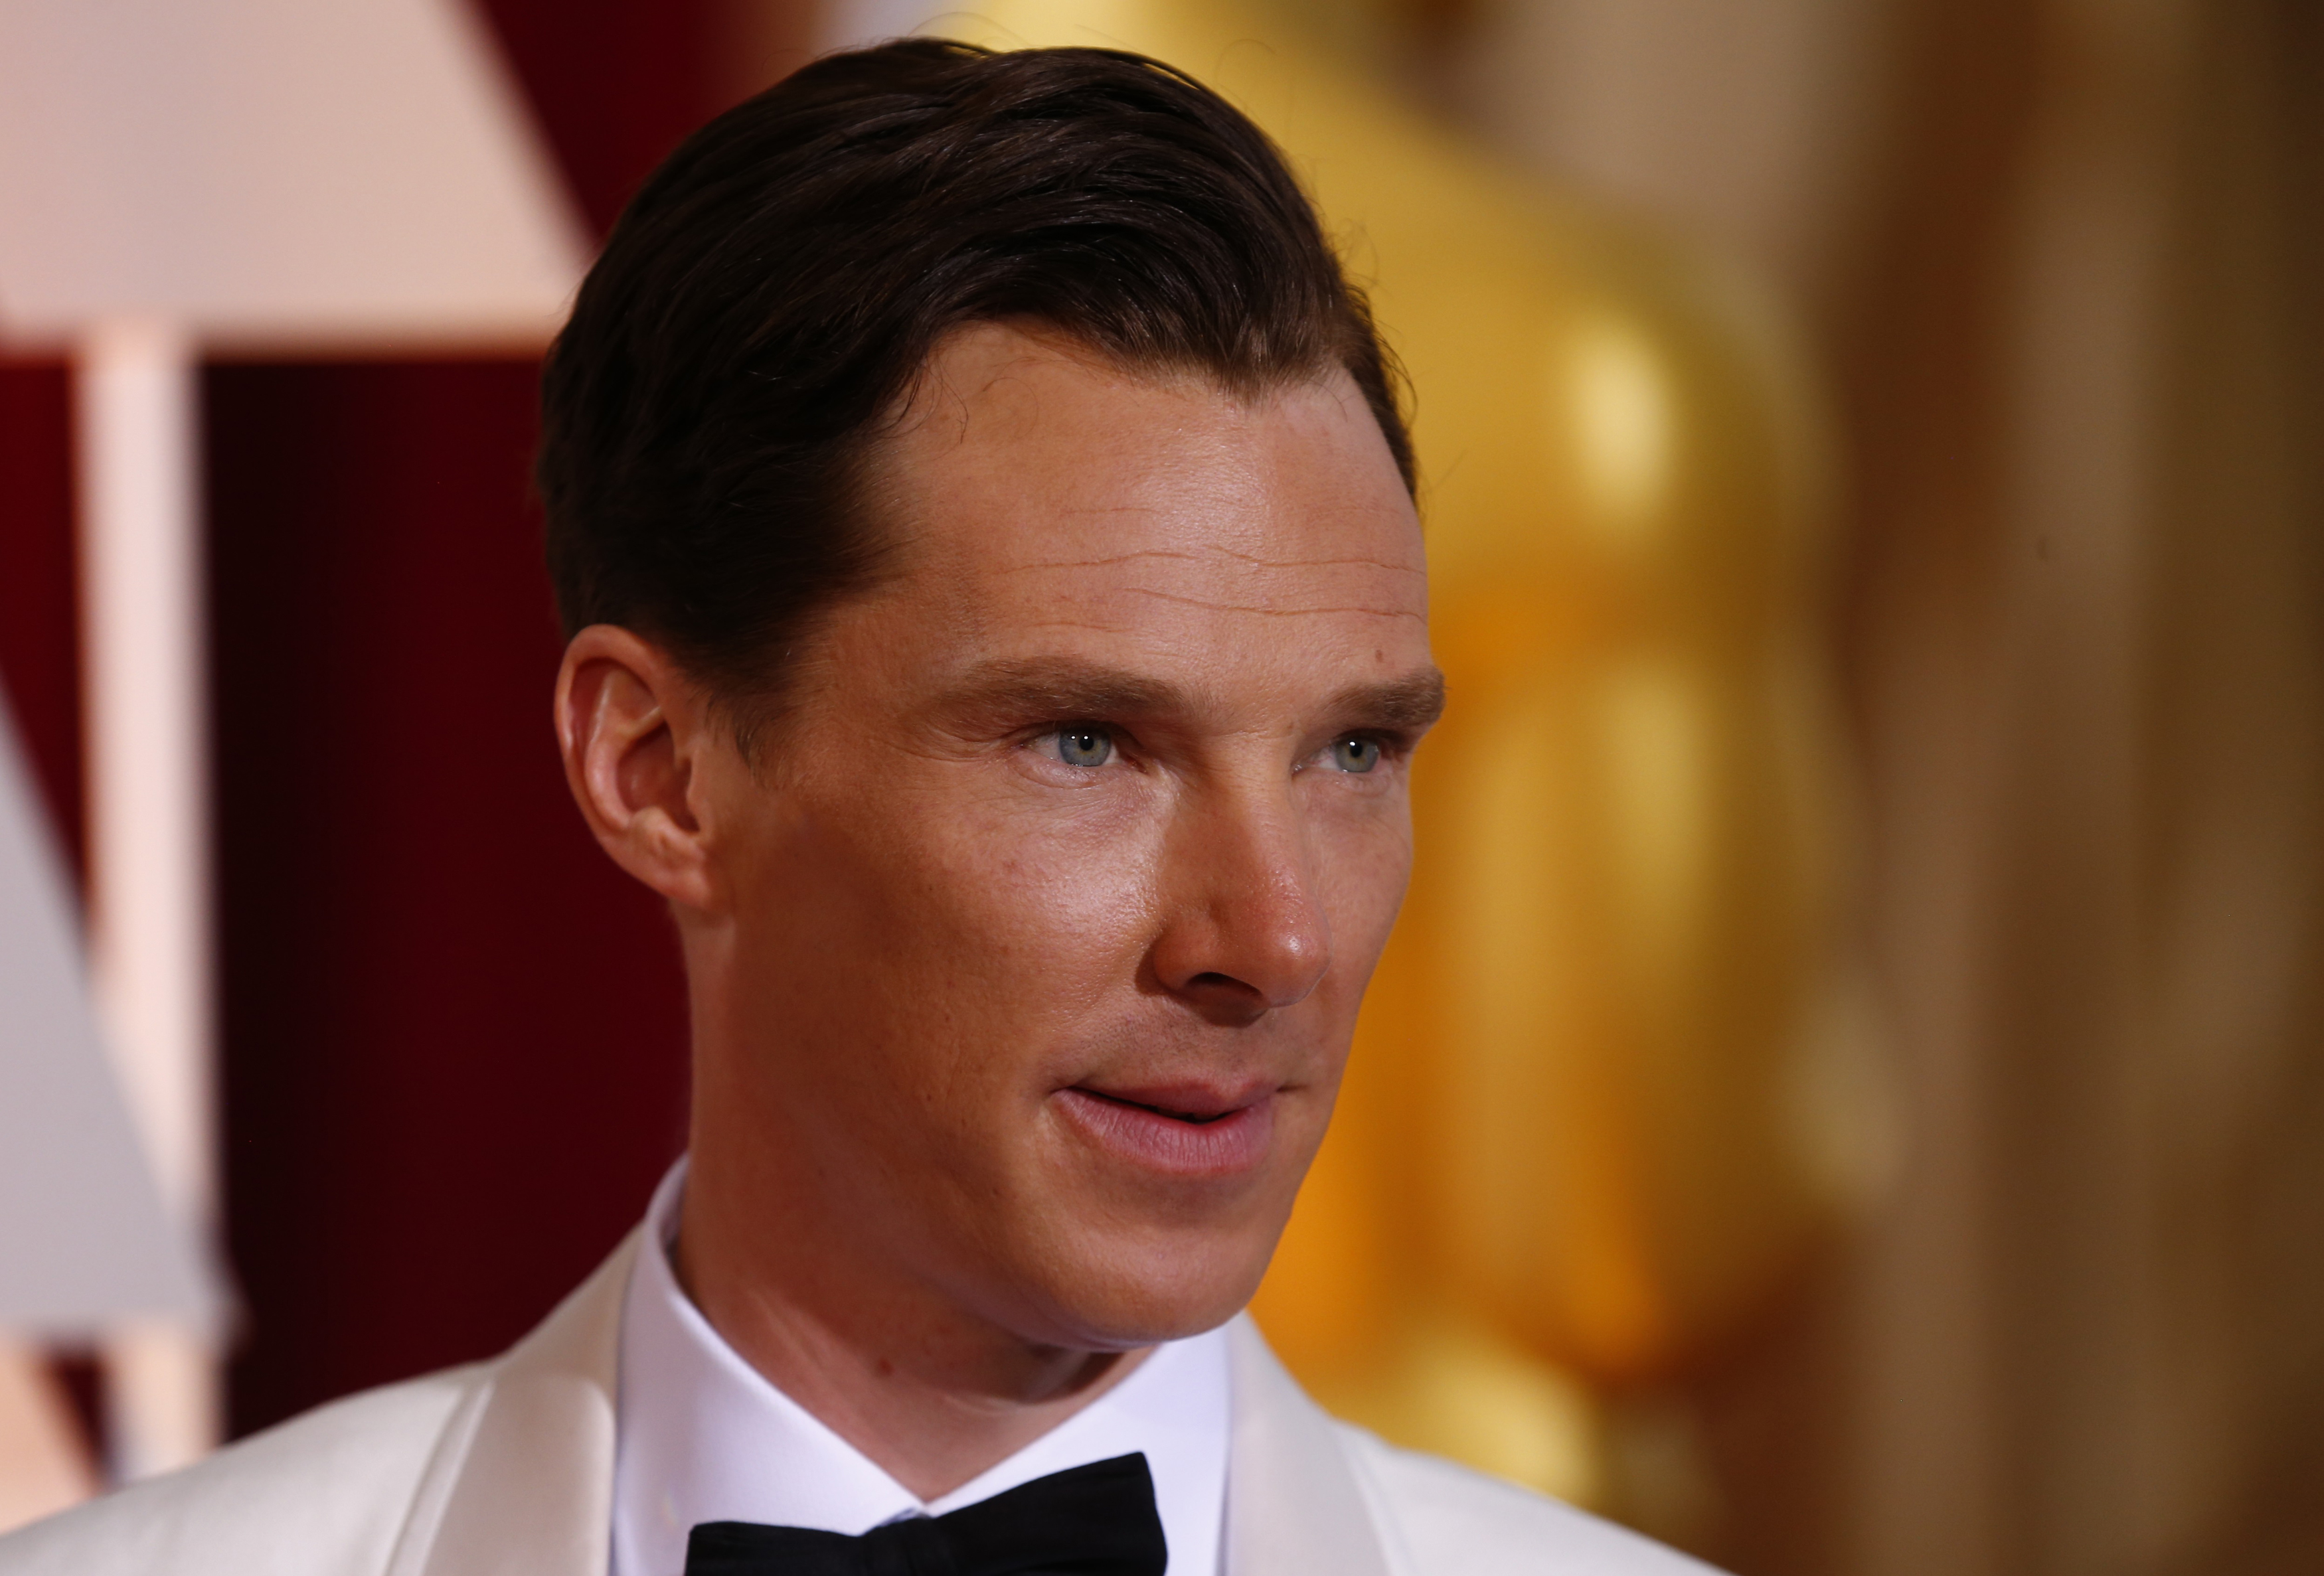 Benedict Cumberbatch, Best Actor nominee for his role in <i>The Imitation Game</i>, arrives at the 87th Academy Awards in Hollywood on Feb. 22, 2015 (Lucas Jackson—Reuters)